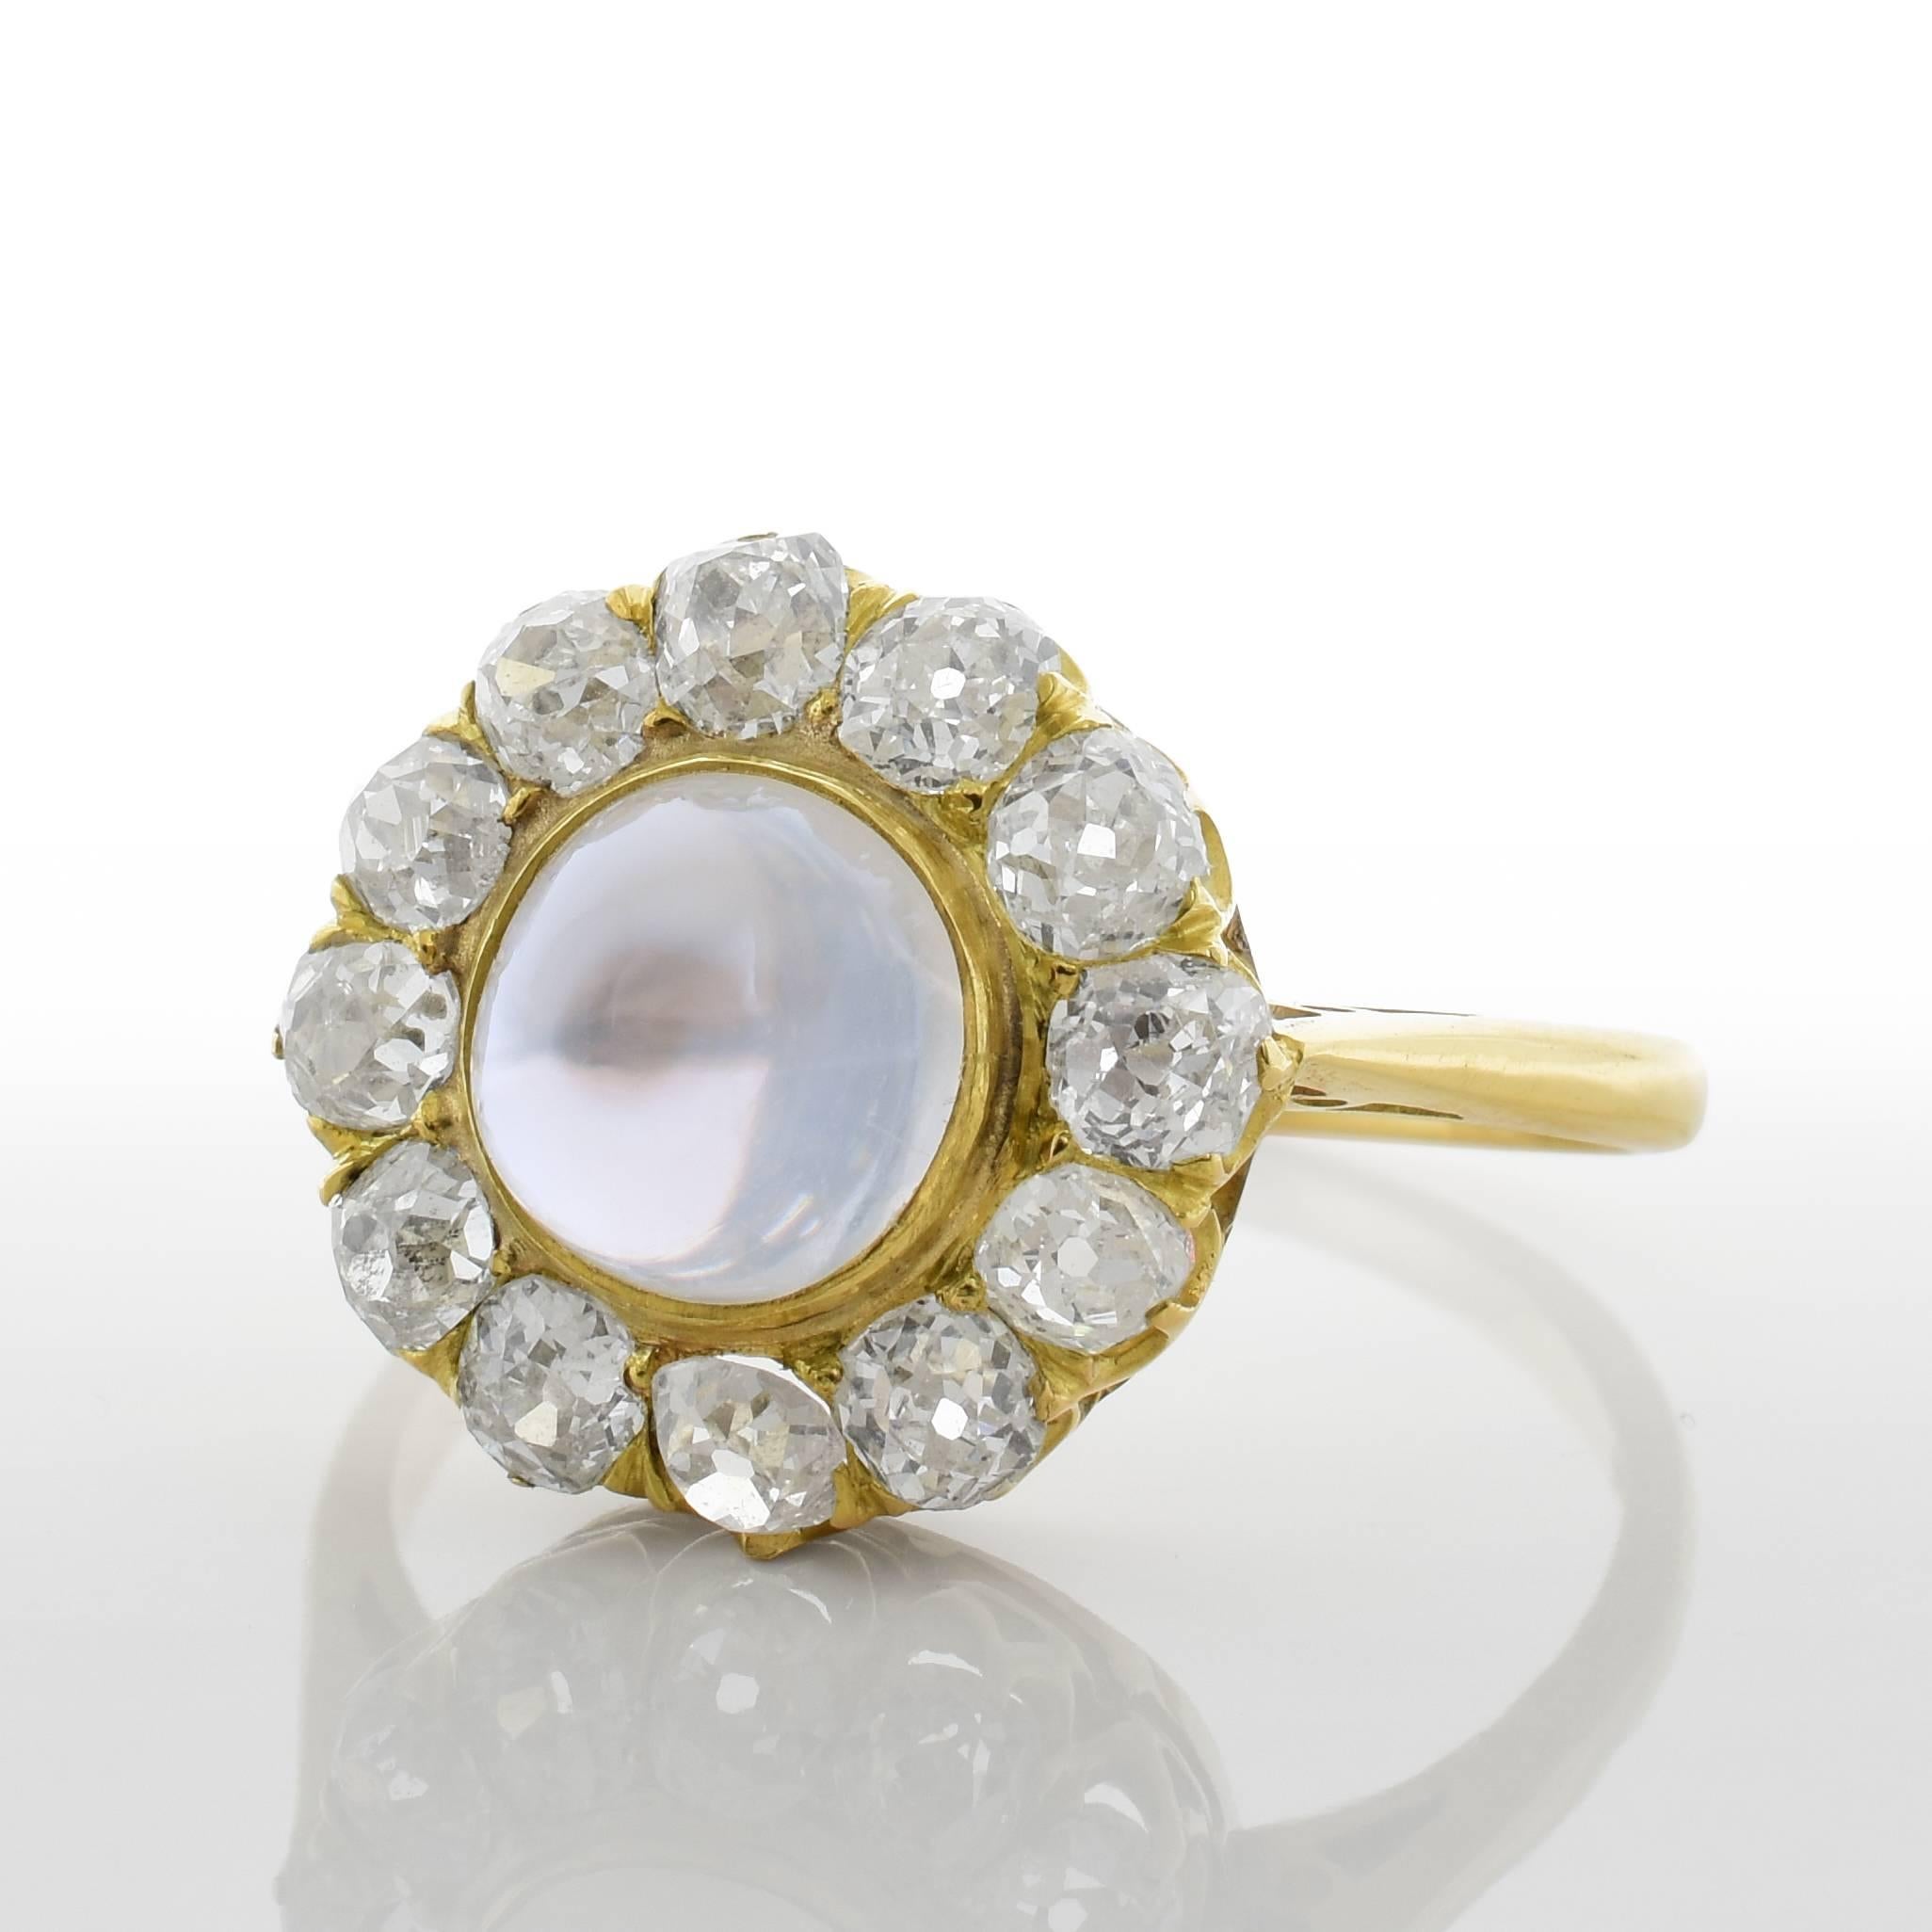 This antique ring features a moonstone center. The moonstone is beautiful light periwinkle. It is surrounded by approximately 1.50 carats of old cut diamonds and set in 18k yellow gold.